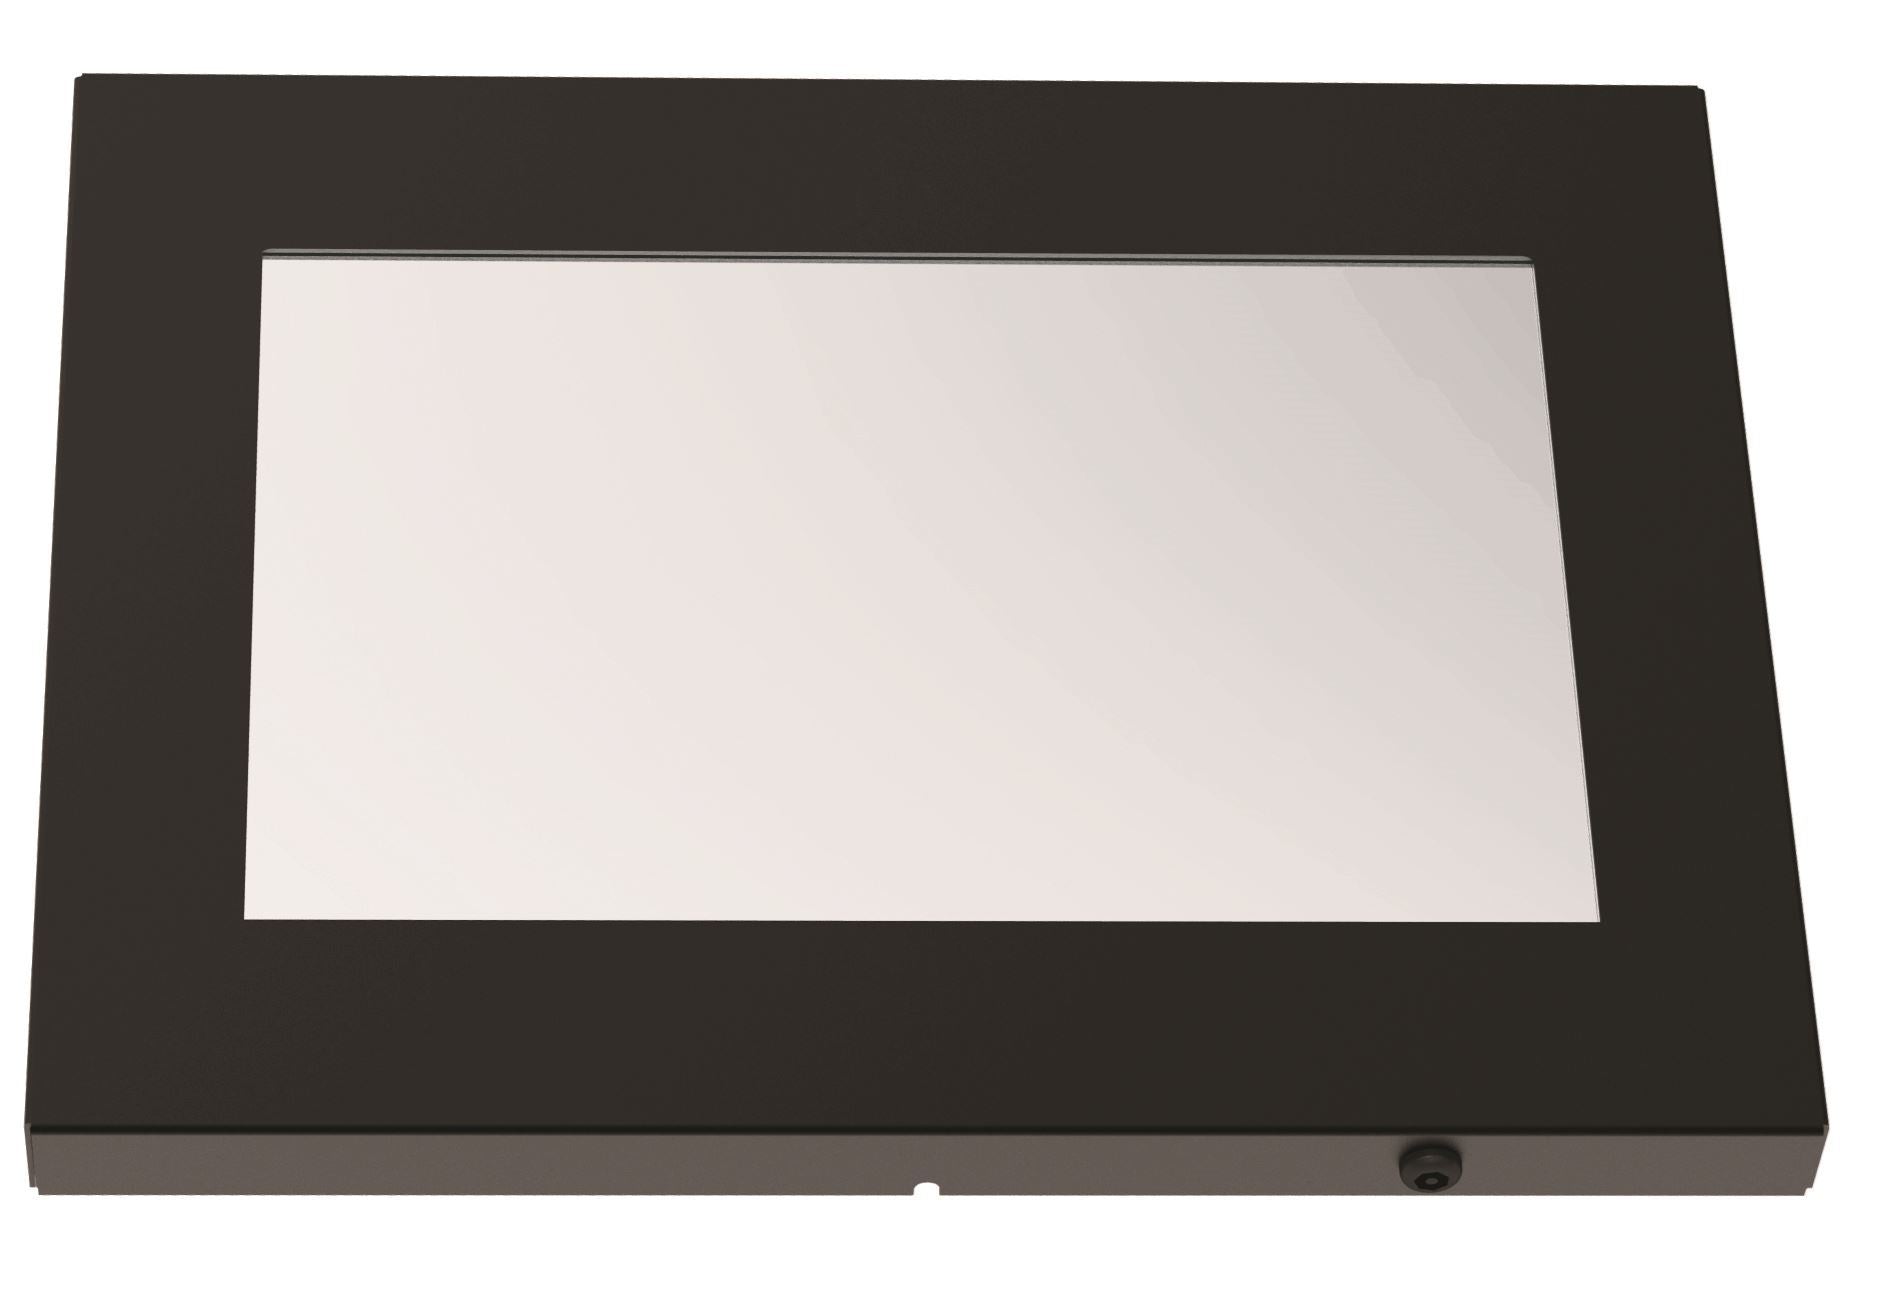 BRATECK Samsung Anti-Theft Steel Wall/Cabinet Mount Tablet Enclosure Designed for 10.1" Galaxy Tab/Note